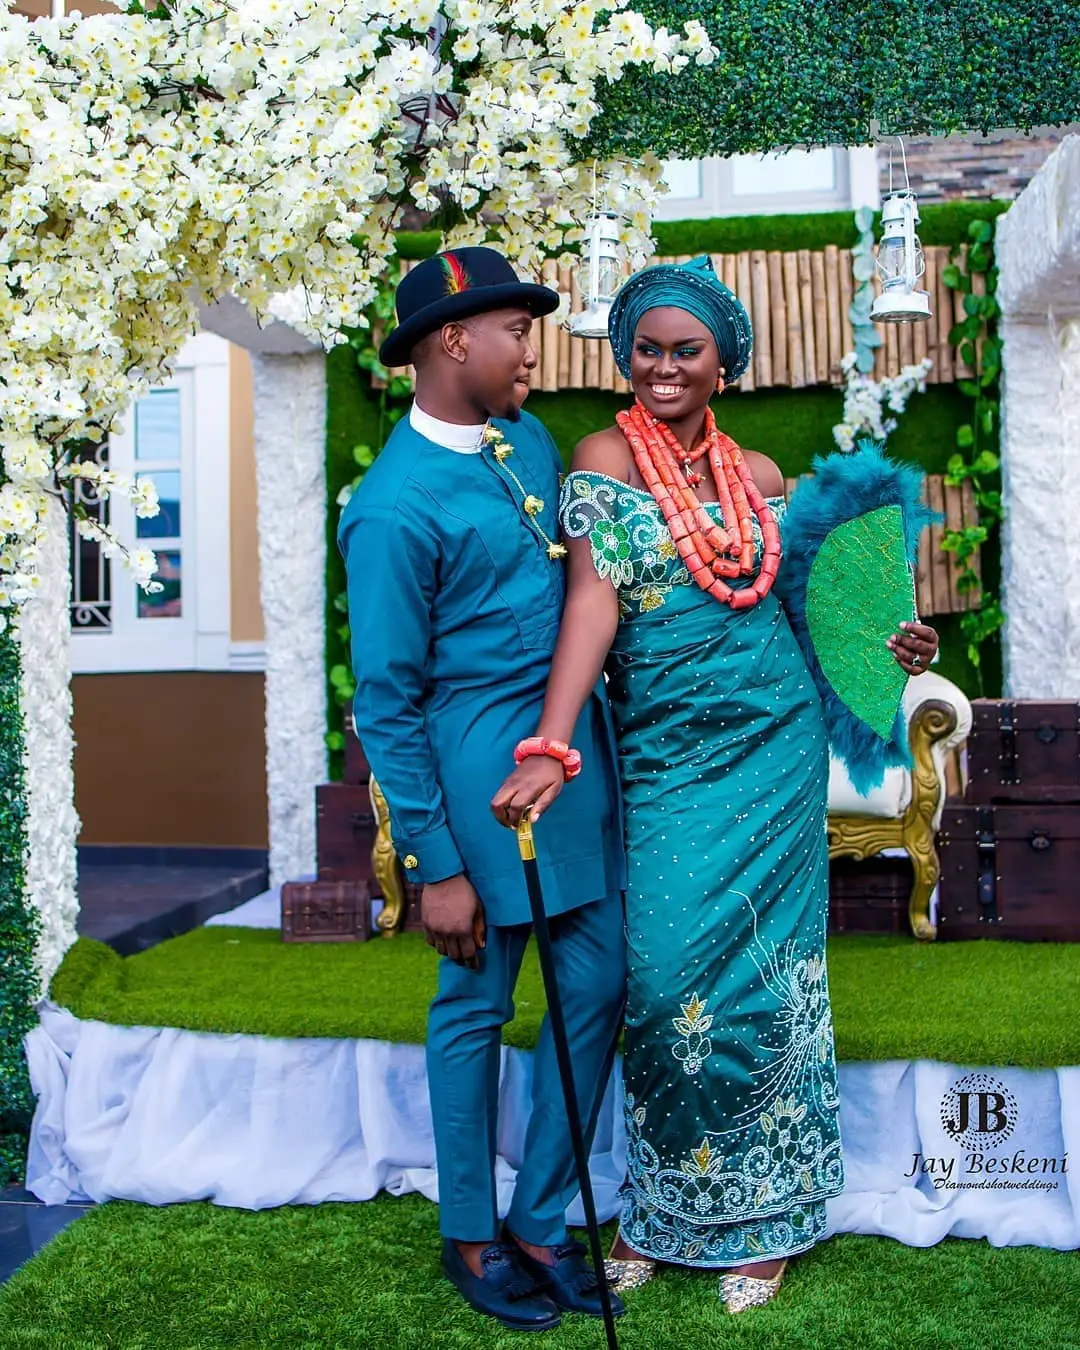 These Stunning Igbo Brides Are The Real Deal!